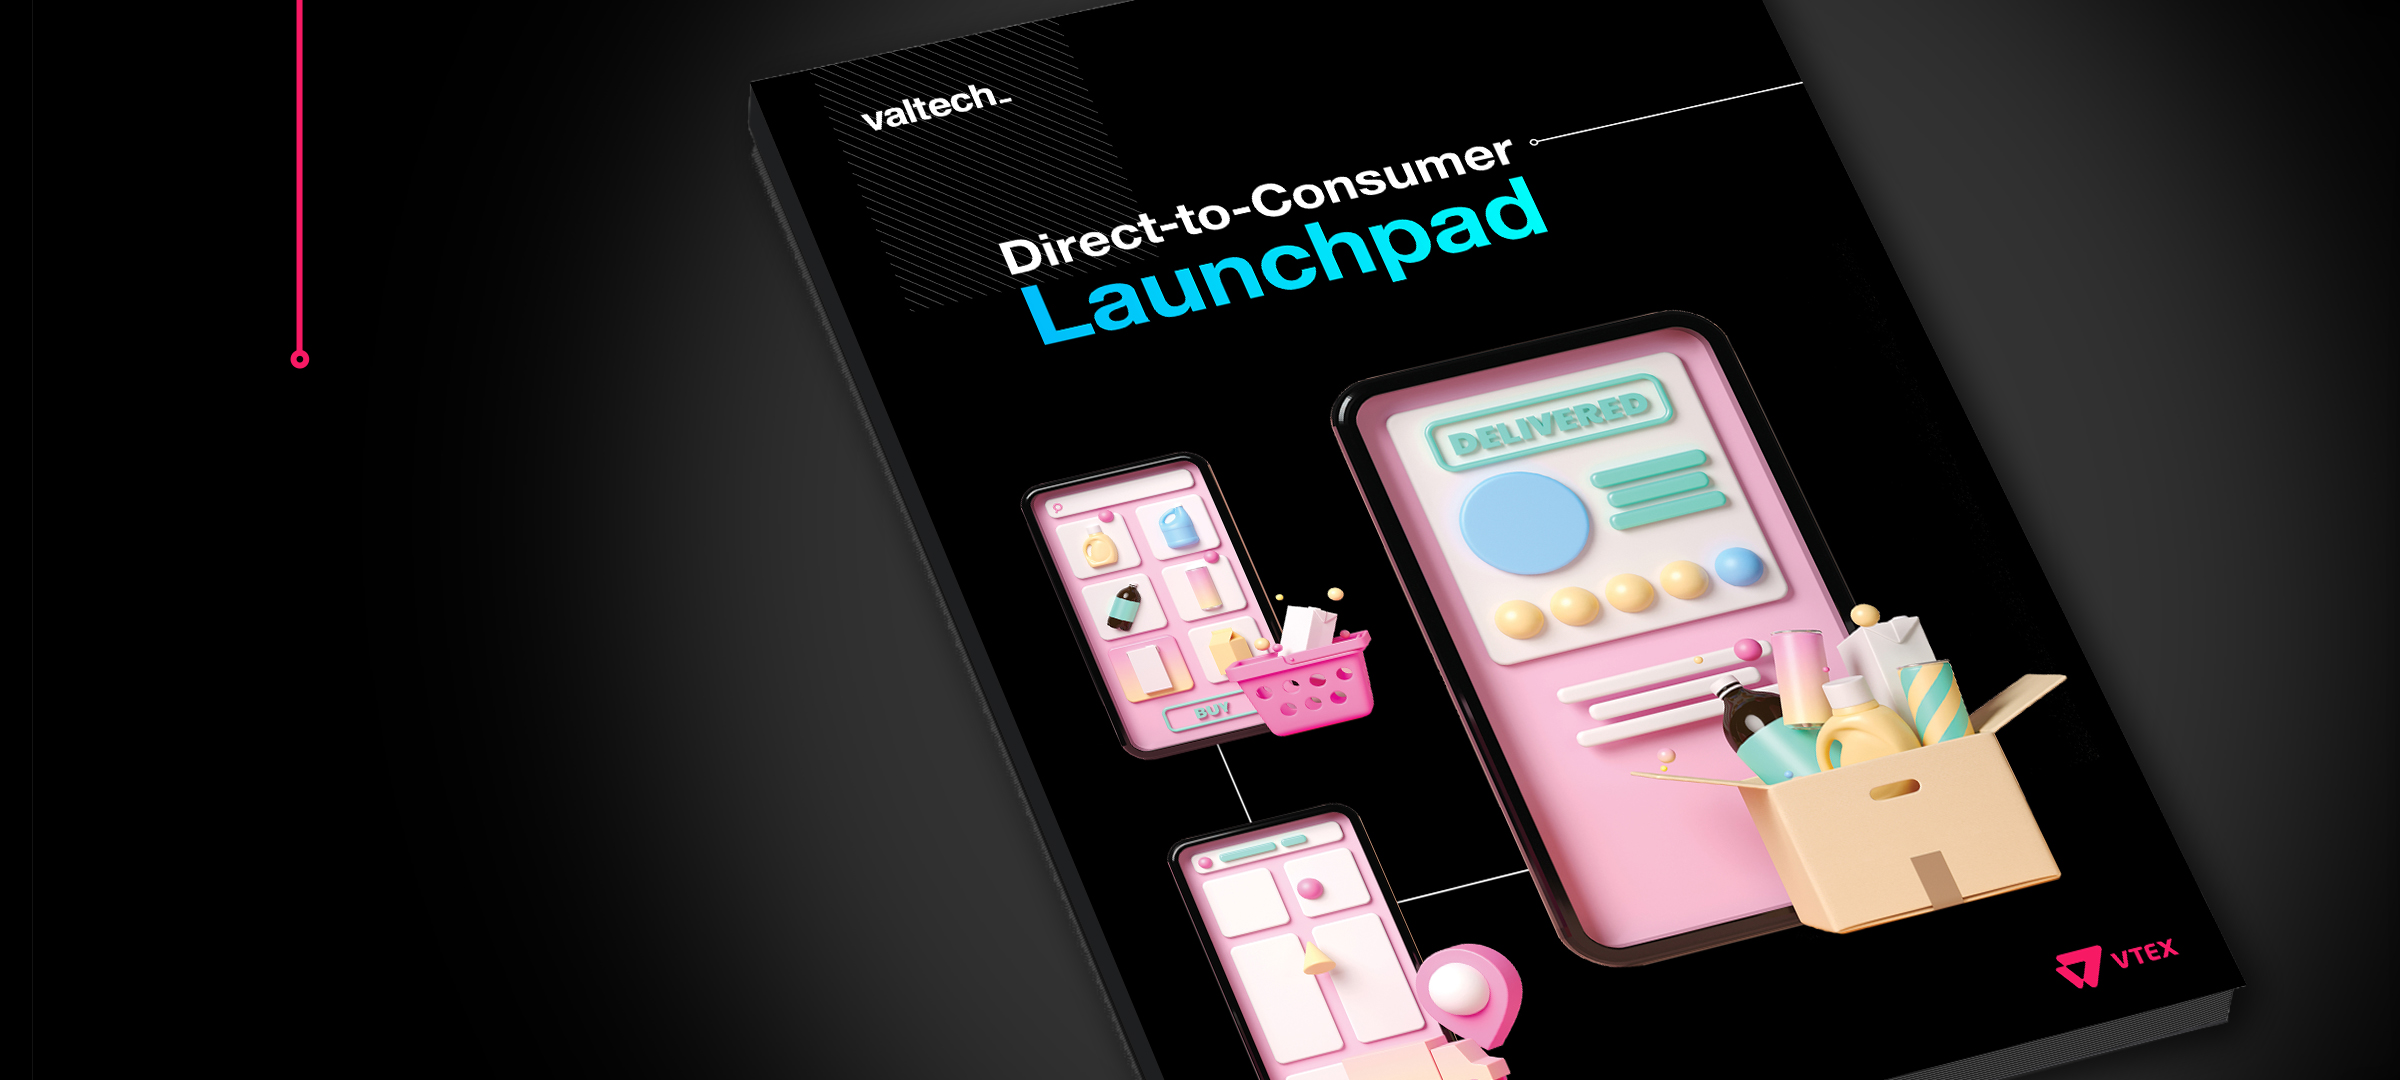 The Direct-to-Consumer Launchpad